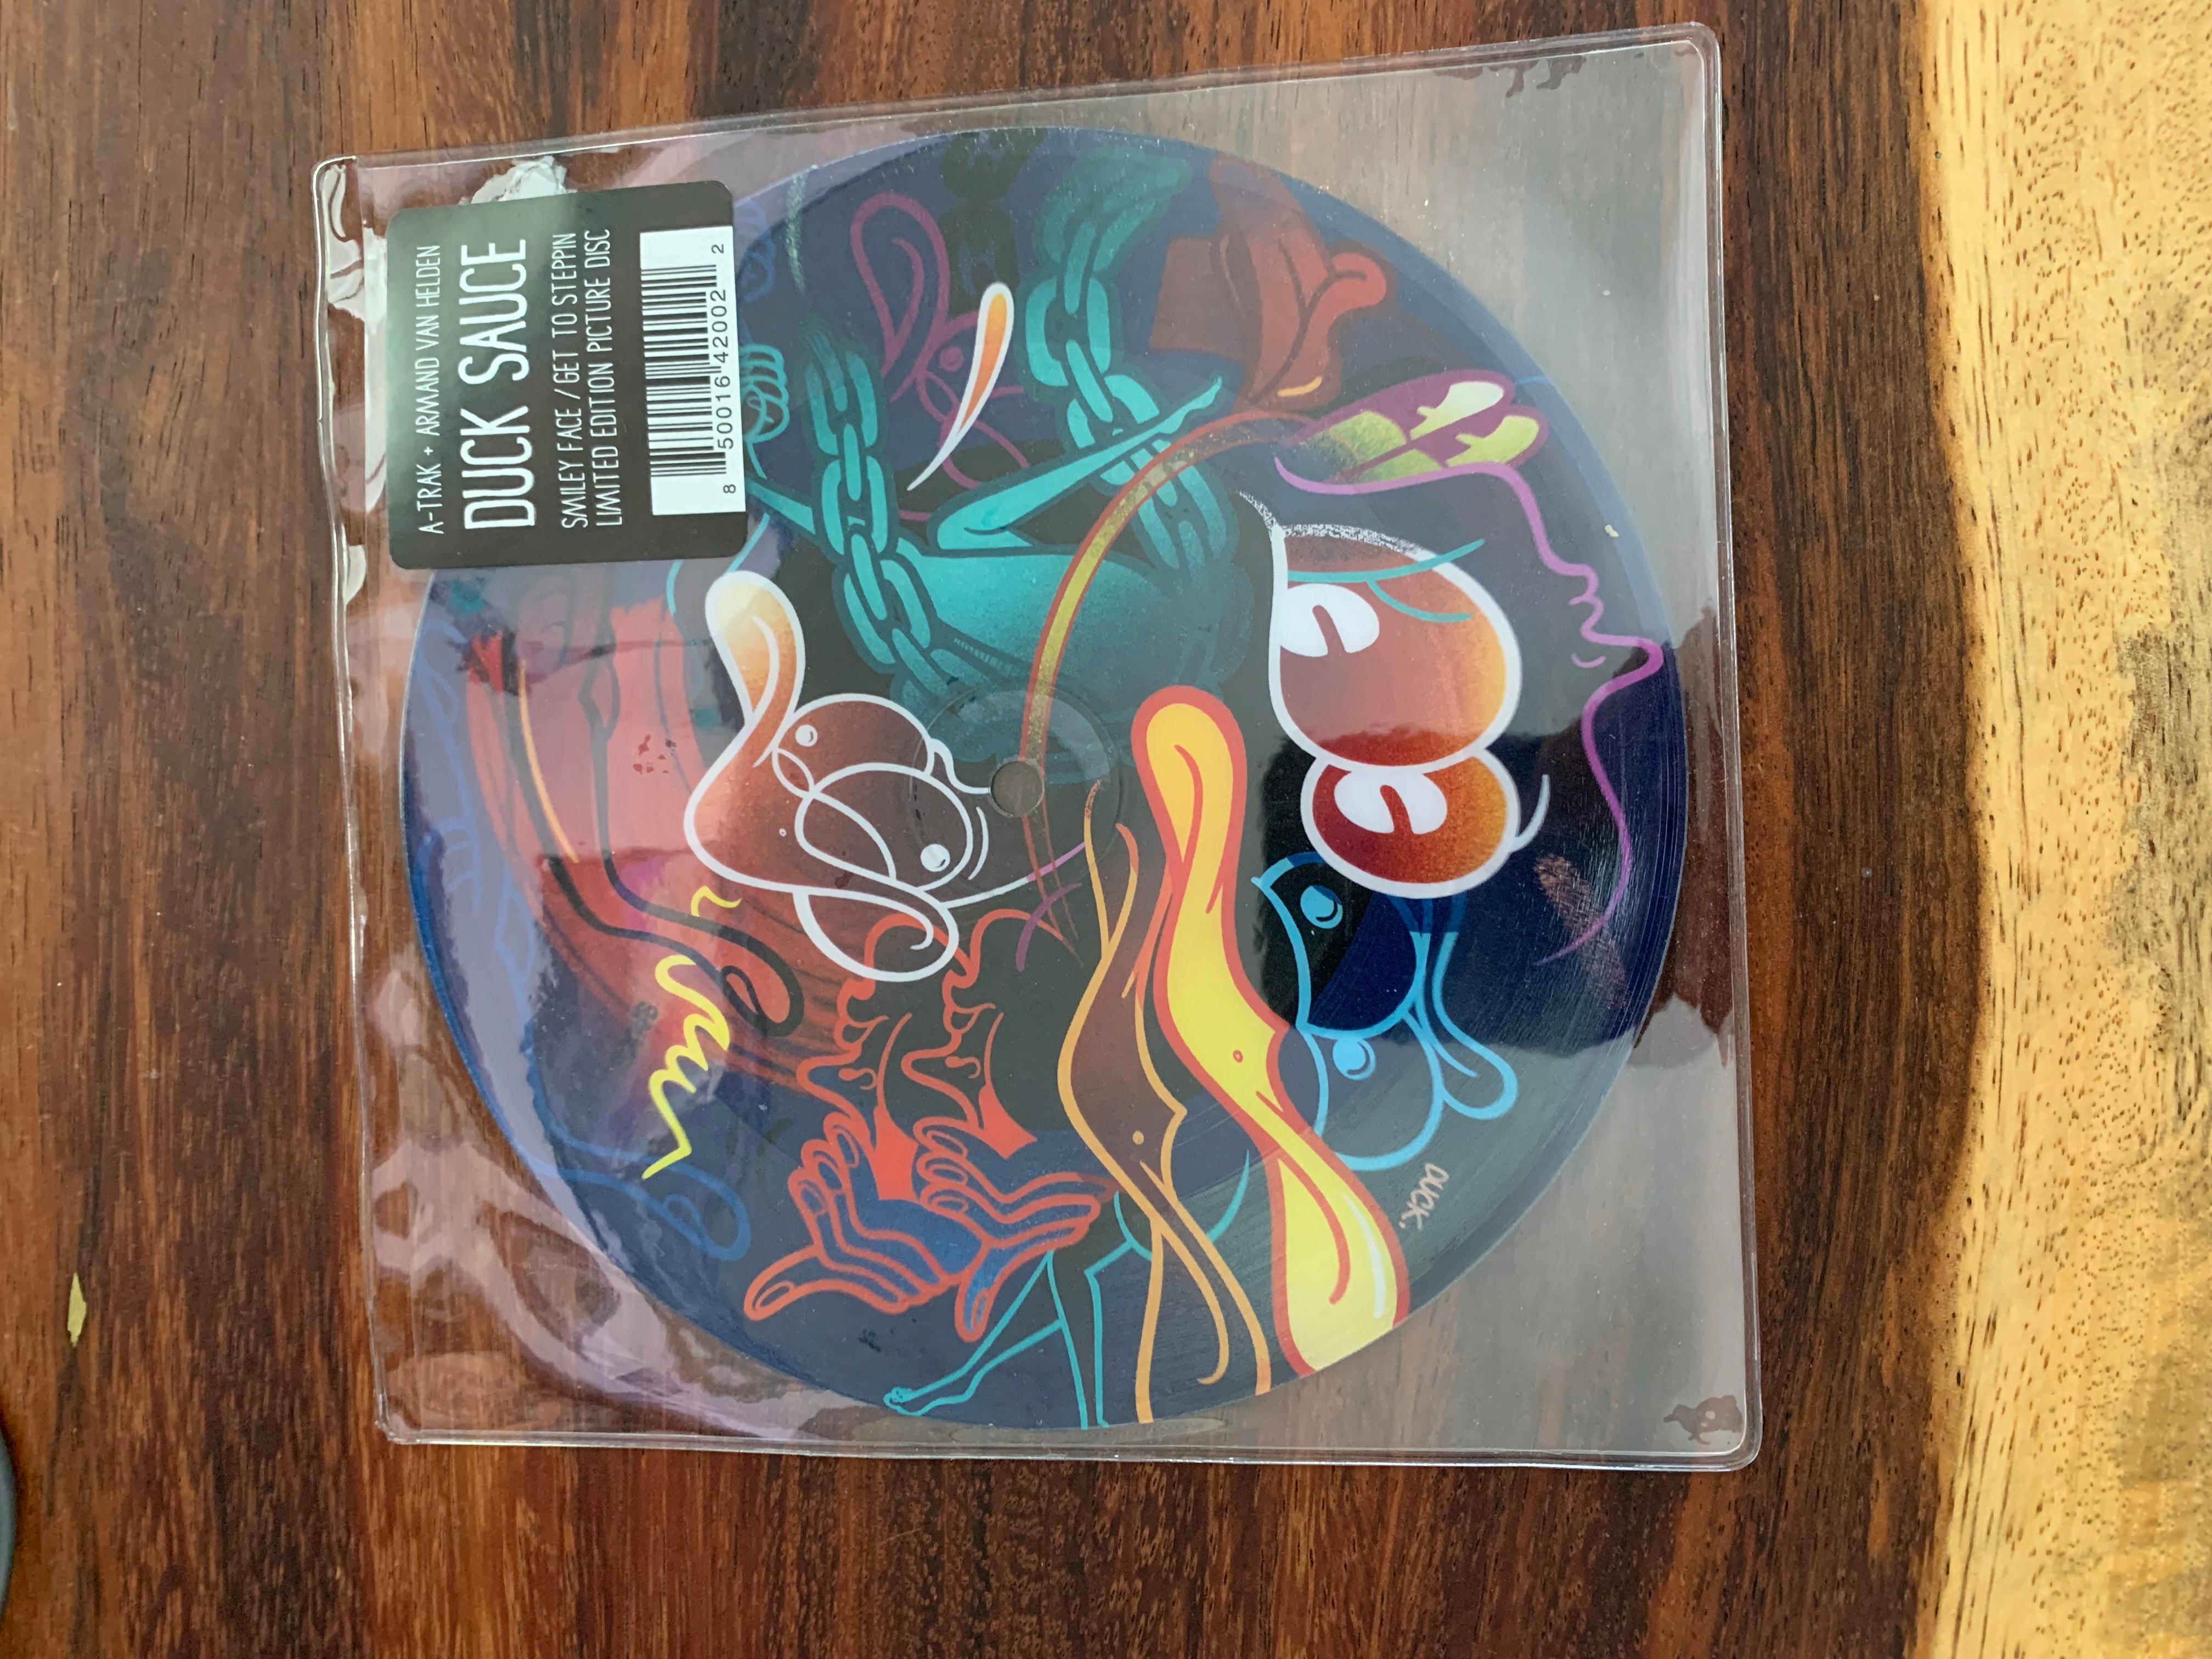 Duck Sauce - Captain Duck / I Don't Mind Limited Edition Vinyl by POSE 7